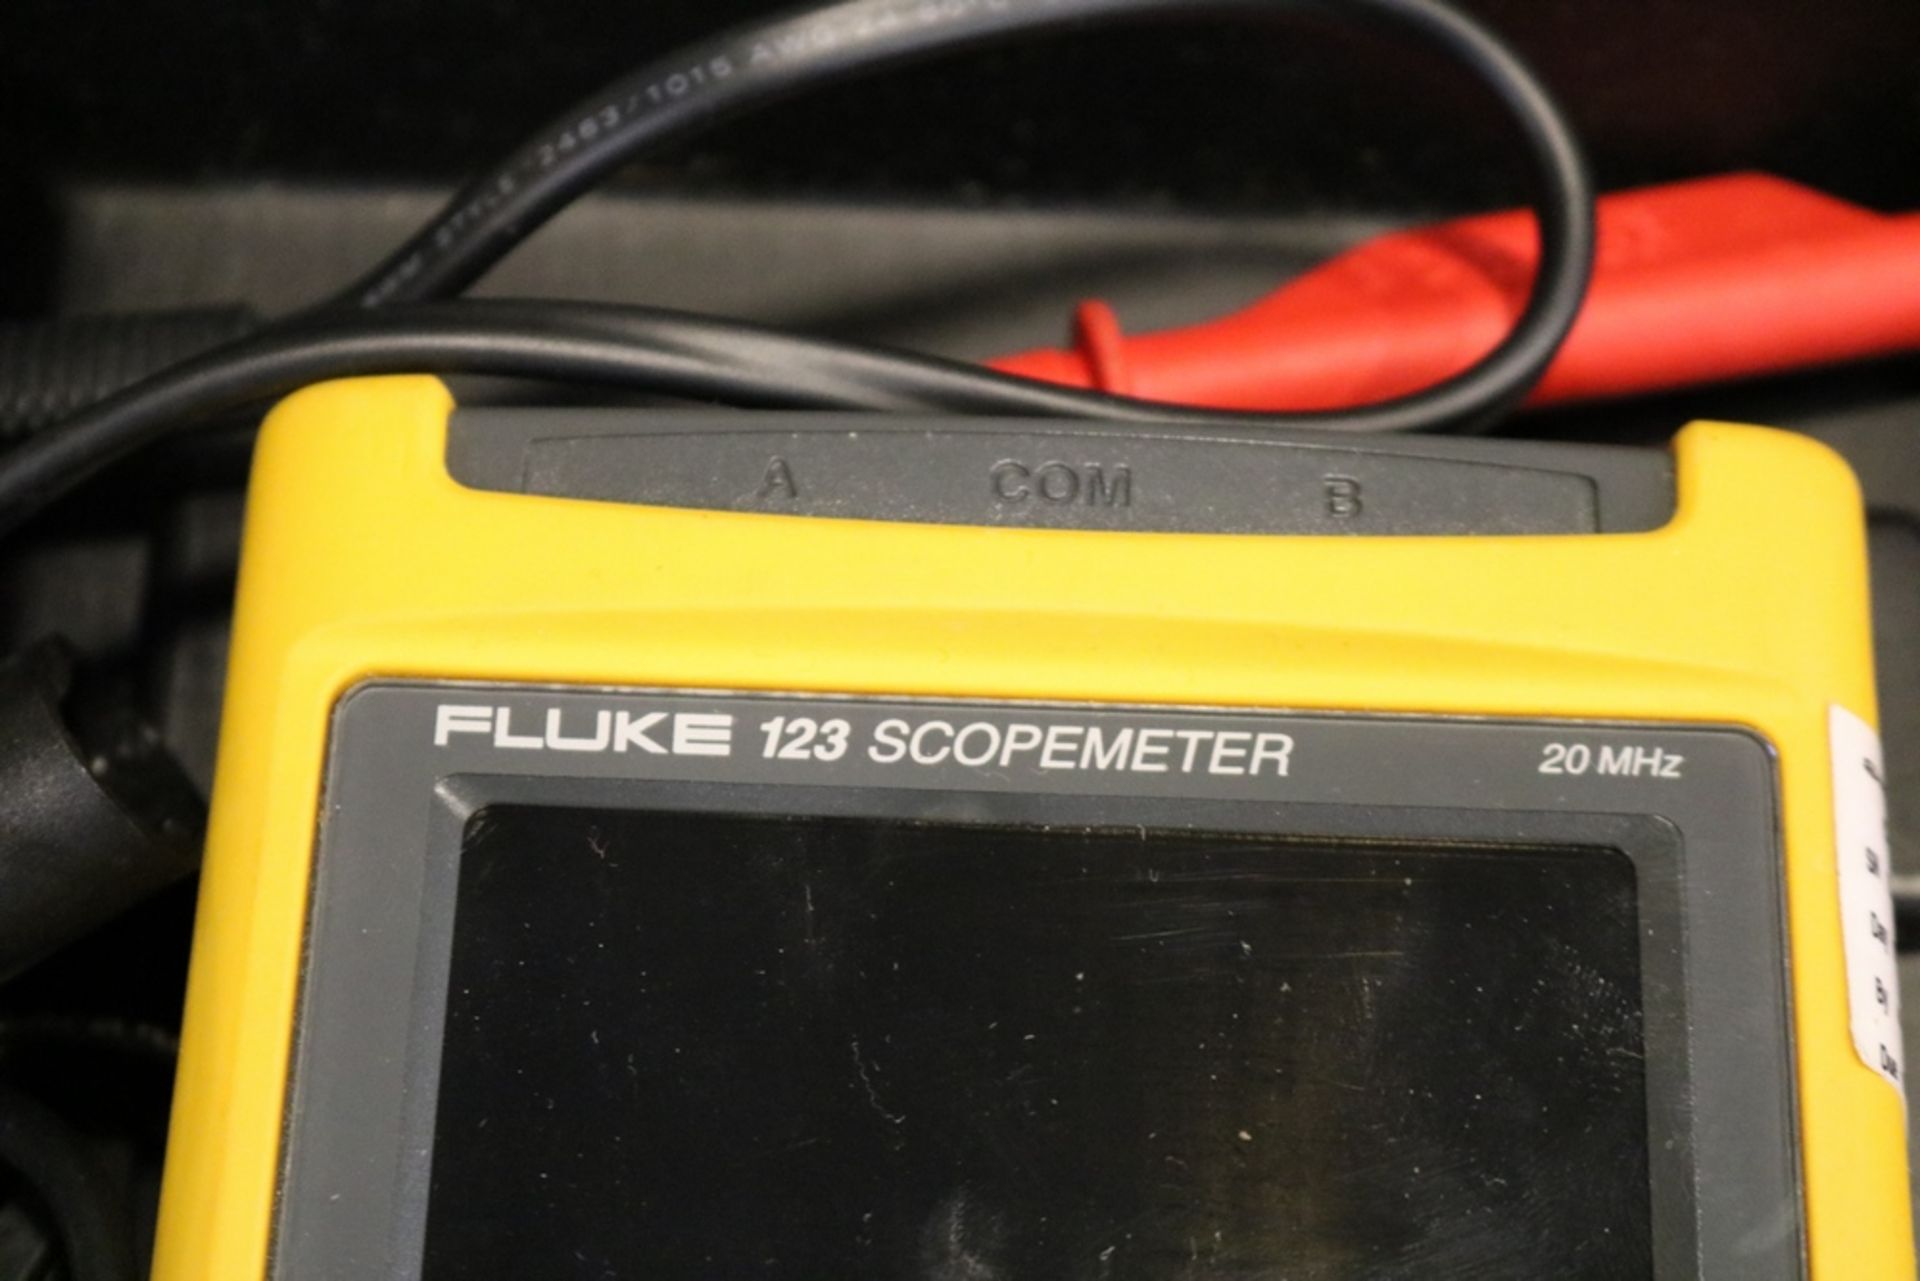 Fluke 123 Scope Meter in Case with Accessories - Image 3 of 7